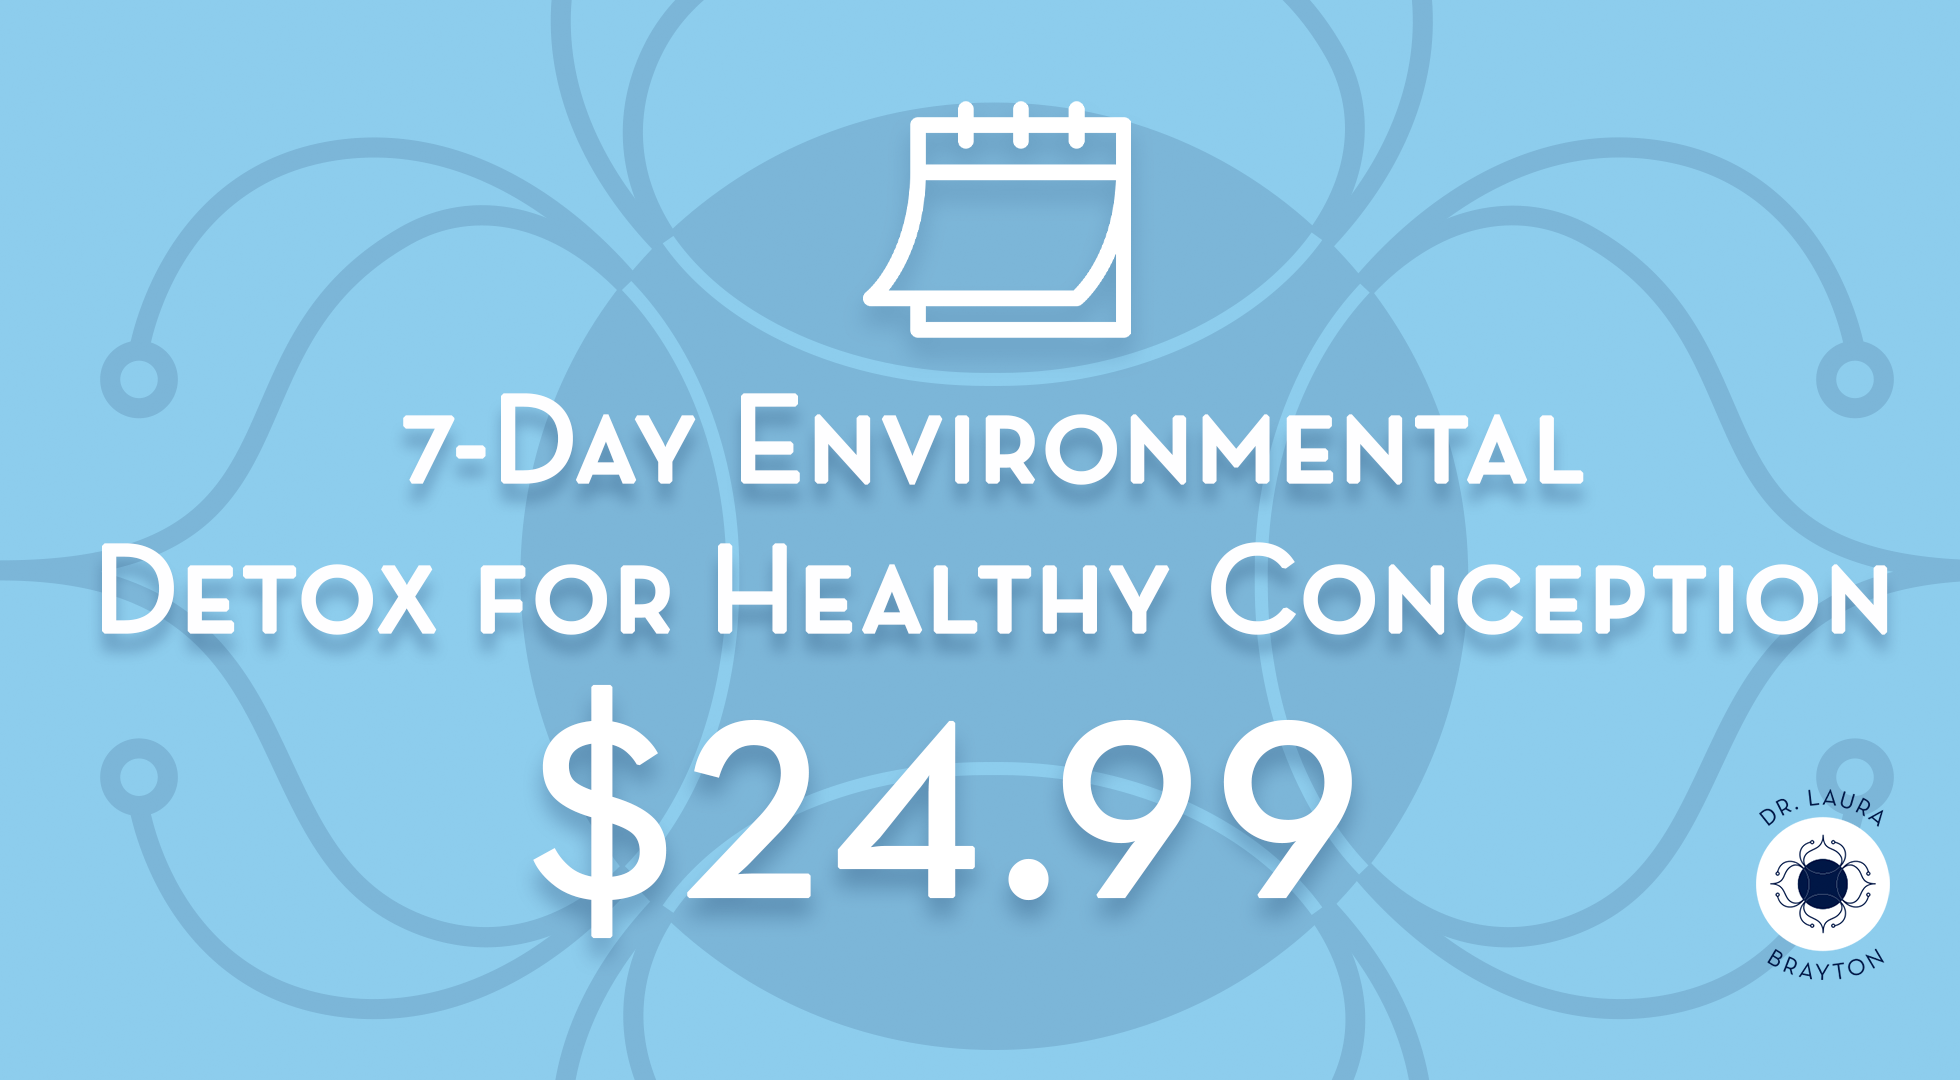 7-Day Environmental Detox for Healthy Conception